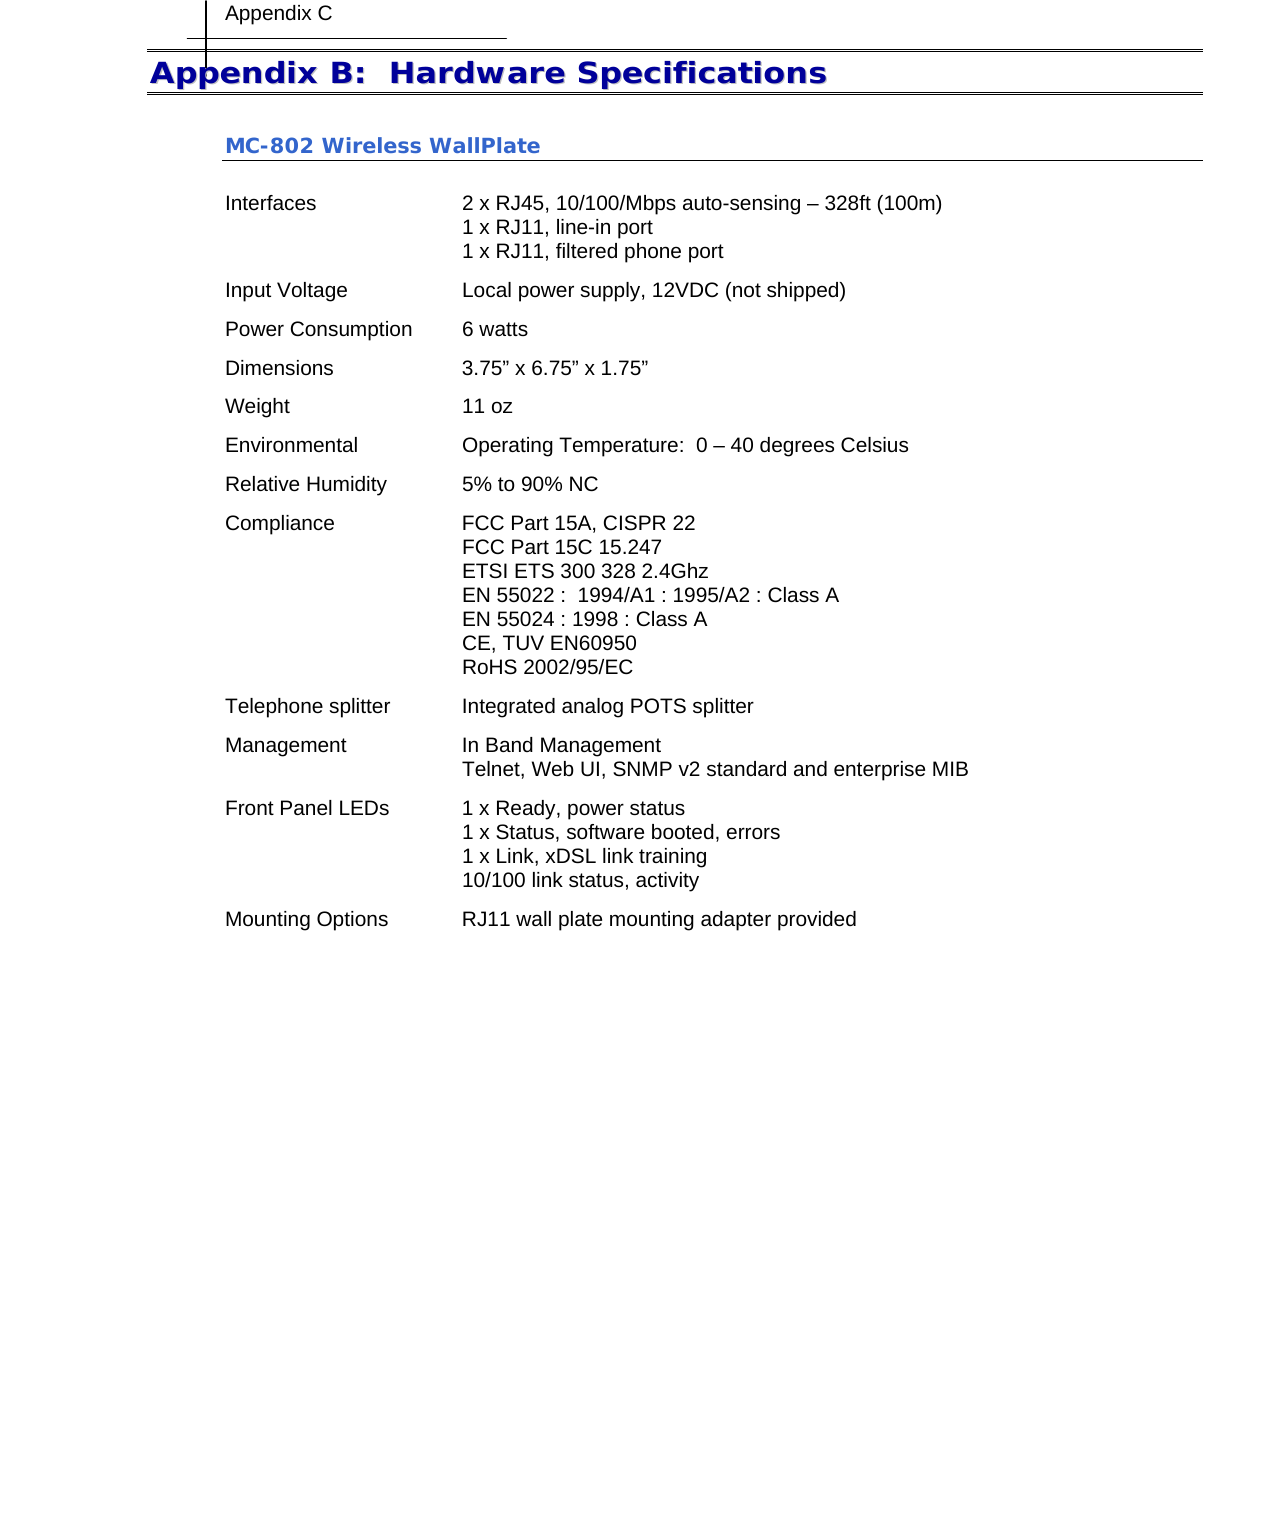 Appendix C    AAppppeennddiixx  BB::    HHaarrddwwaarree  SSppeecciiffiiccaattiioonnss  MC-802 Wireless WallPlate  Interfaces  2 x RJ45, 10/100/Mbps auto-sensing – 328ft (100m) 1 x RJ11, line-in port  1 x RJ11, filtered phone port Input Voltage  Local power supply, 12VDC (not shipped) Power Consumption  6 watts Dimensions  3.75” x 6.75” x 1.75” Weight 11 oz Environmental  Operating Temperature:  0 – 40 degrees Celsius Relative Humidity  5% to 90% NC Compliance  FCC Part 15A, CISPR 22 FCC Part 15C 15.247 ETSI ETS 300 328 2.4Ghz EN 55022 :  1994/A1 : 1995/A2 : Class A EN 55024 : 1998 : Class A CE, TUV EN60950 RoHS 2002/95/EC Telephone splitter  Integrated analog POTS splitter Management  In Band Management Telnet, Web UI, SNMP v2 standard and enterprise MIB Front Panel LEDs  1 x Ready, power status 1 x Status, software booted, errors 1 x Link, xDSL link training 10/100 link status, activity Mounting Options  RJ11 wall plate mounting adapter provided  